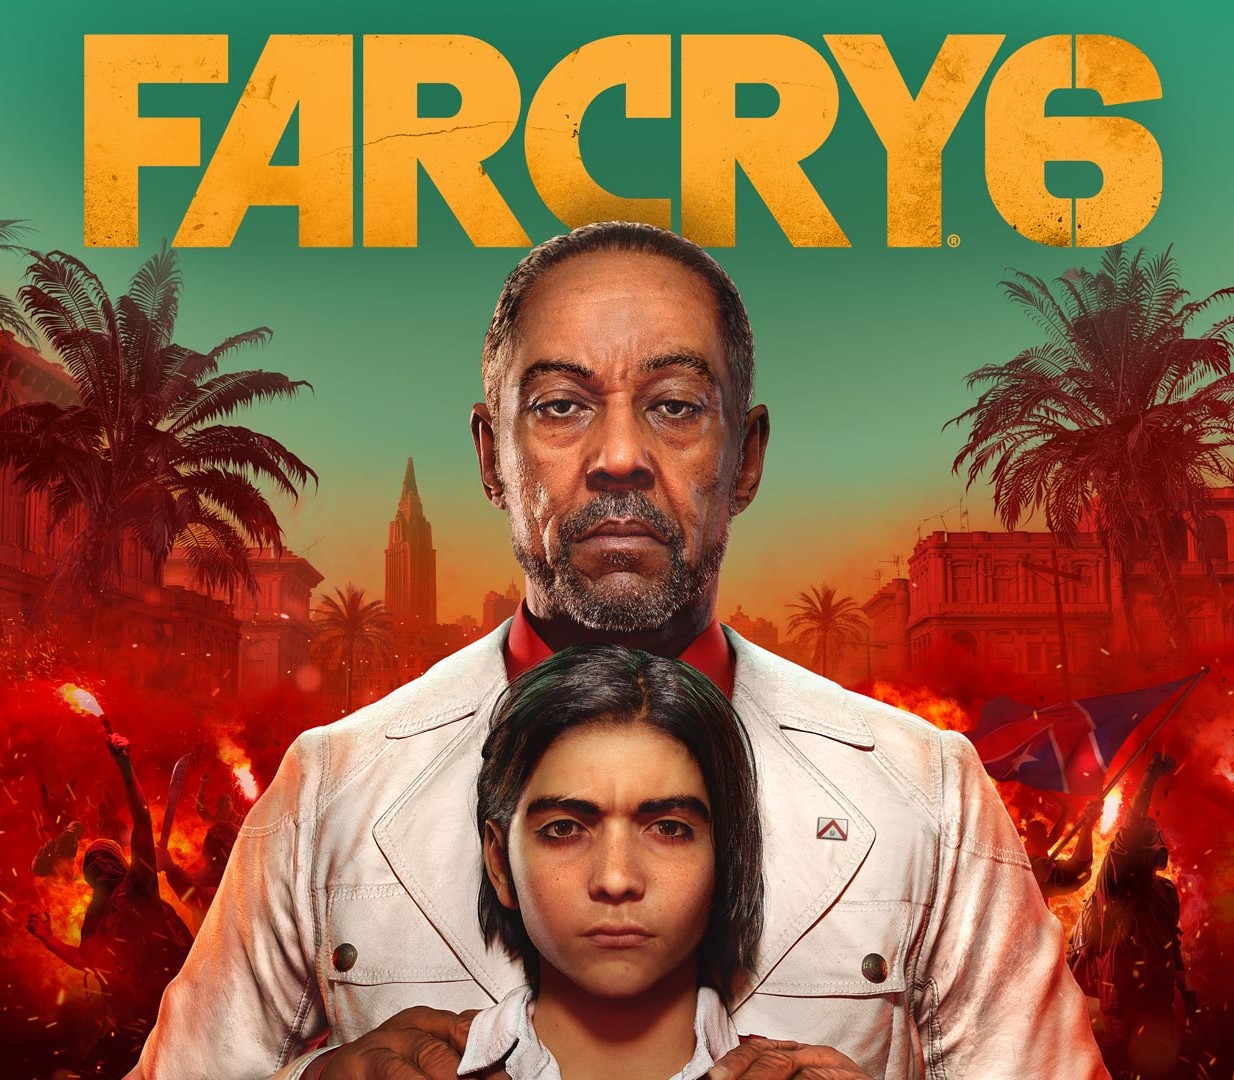 Far Cry 6 - Game of the Year Edition Upgrade Pass DLC Steam Altergift